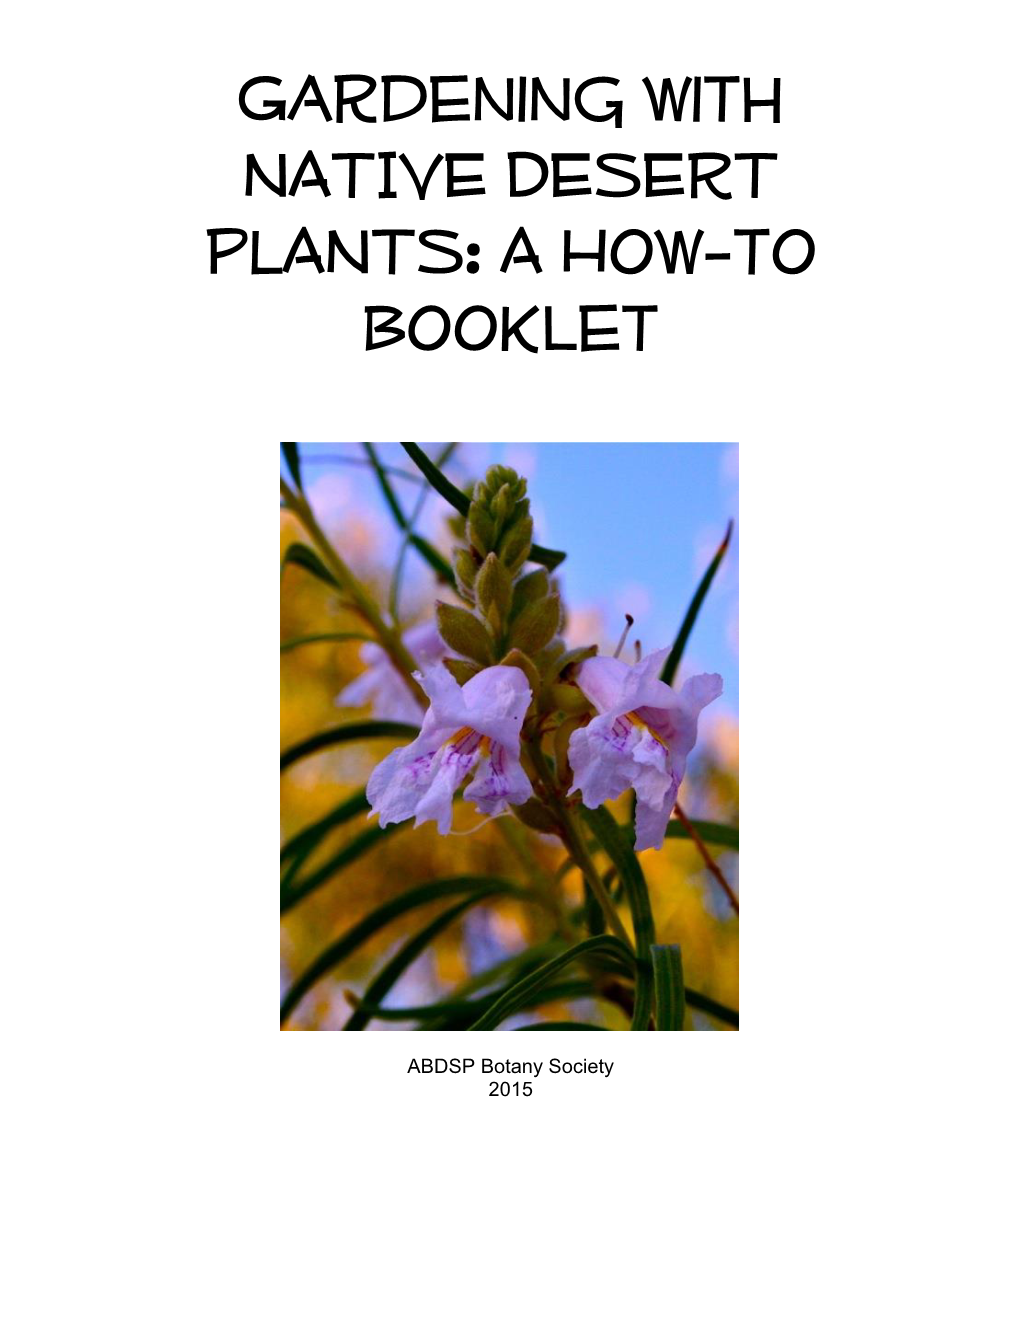 Gardening with NATIVE DESERT PLANTS: a How-To Booklet